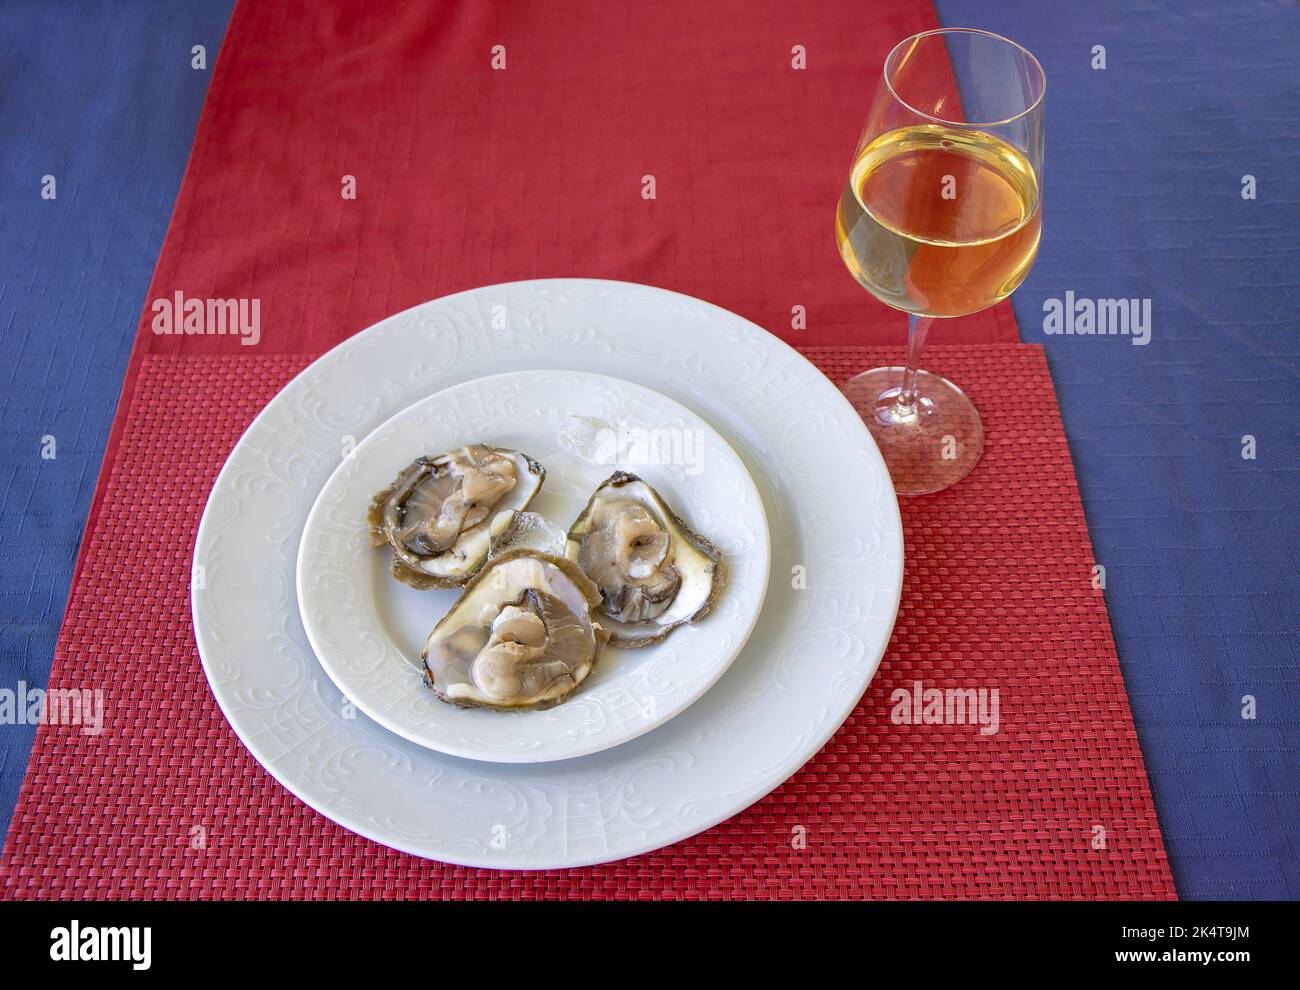 Oysters on a plate and a glass of white wine Stock Photo